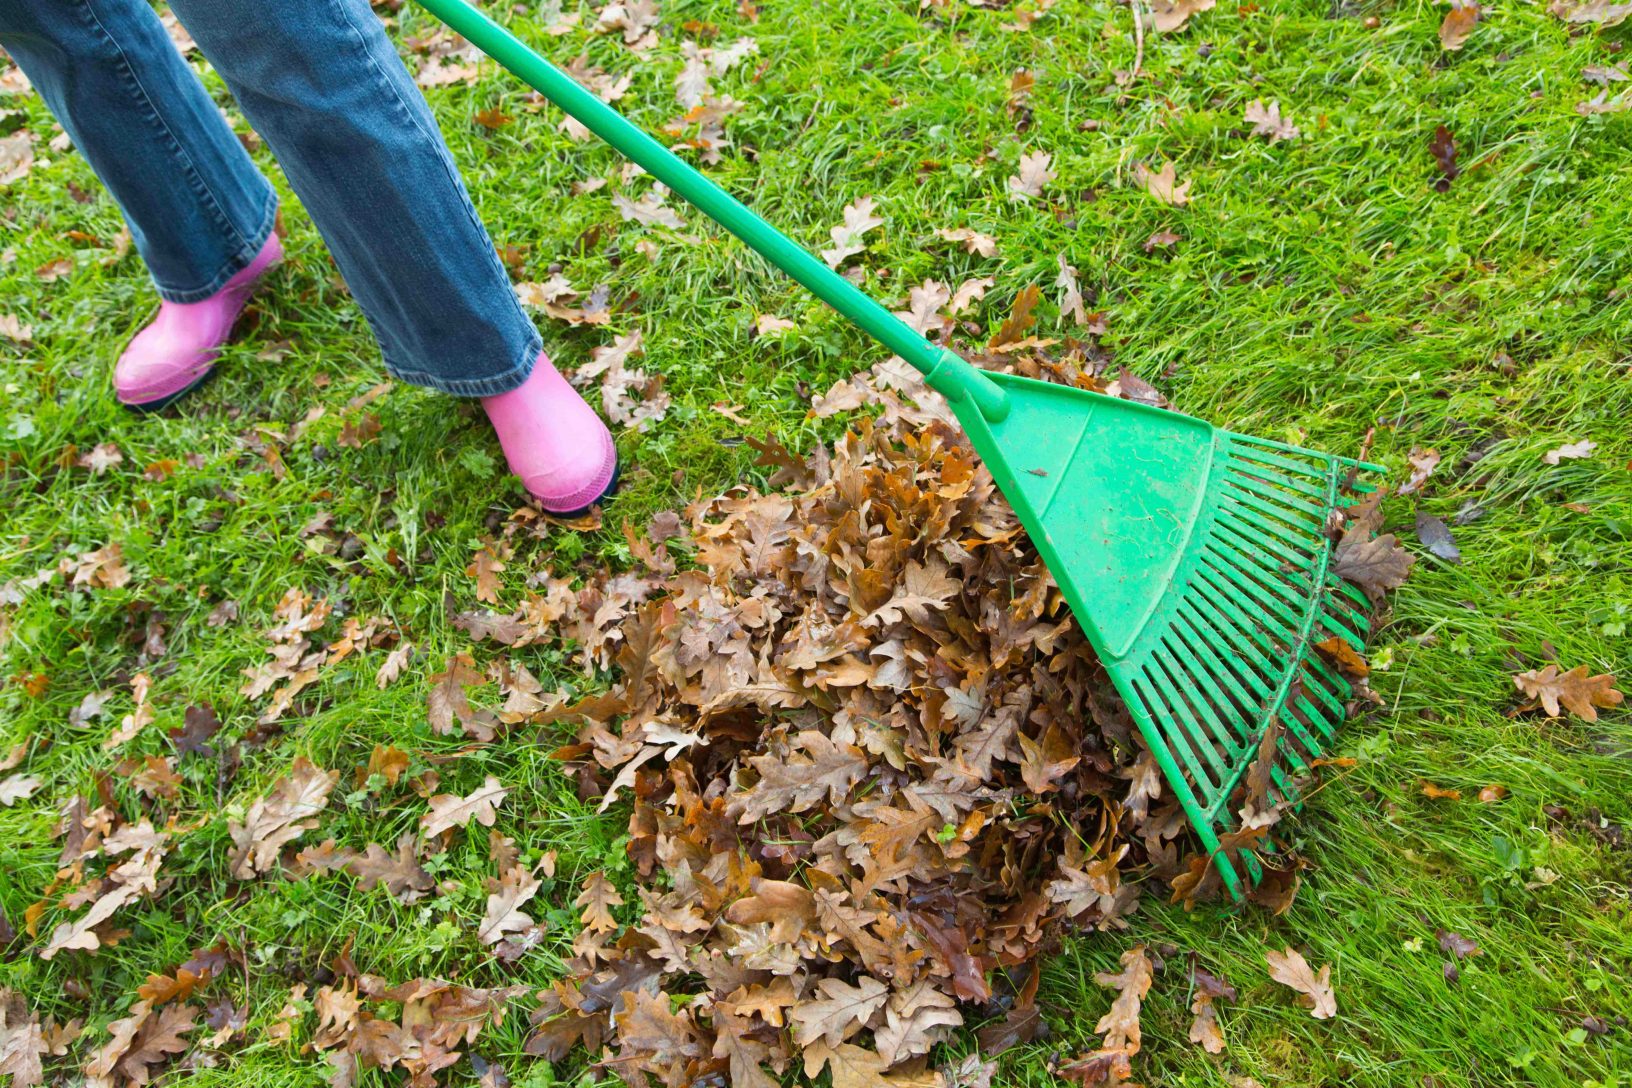 A person uses a green spring tine rake to clear autumn leaves in their garden